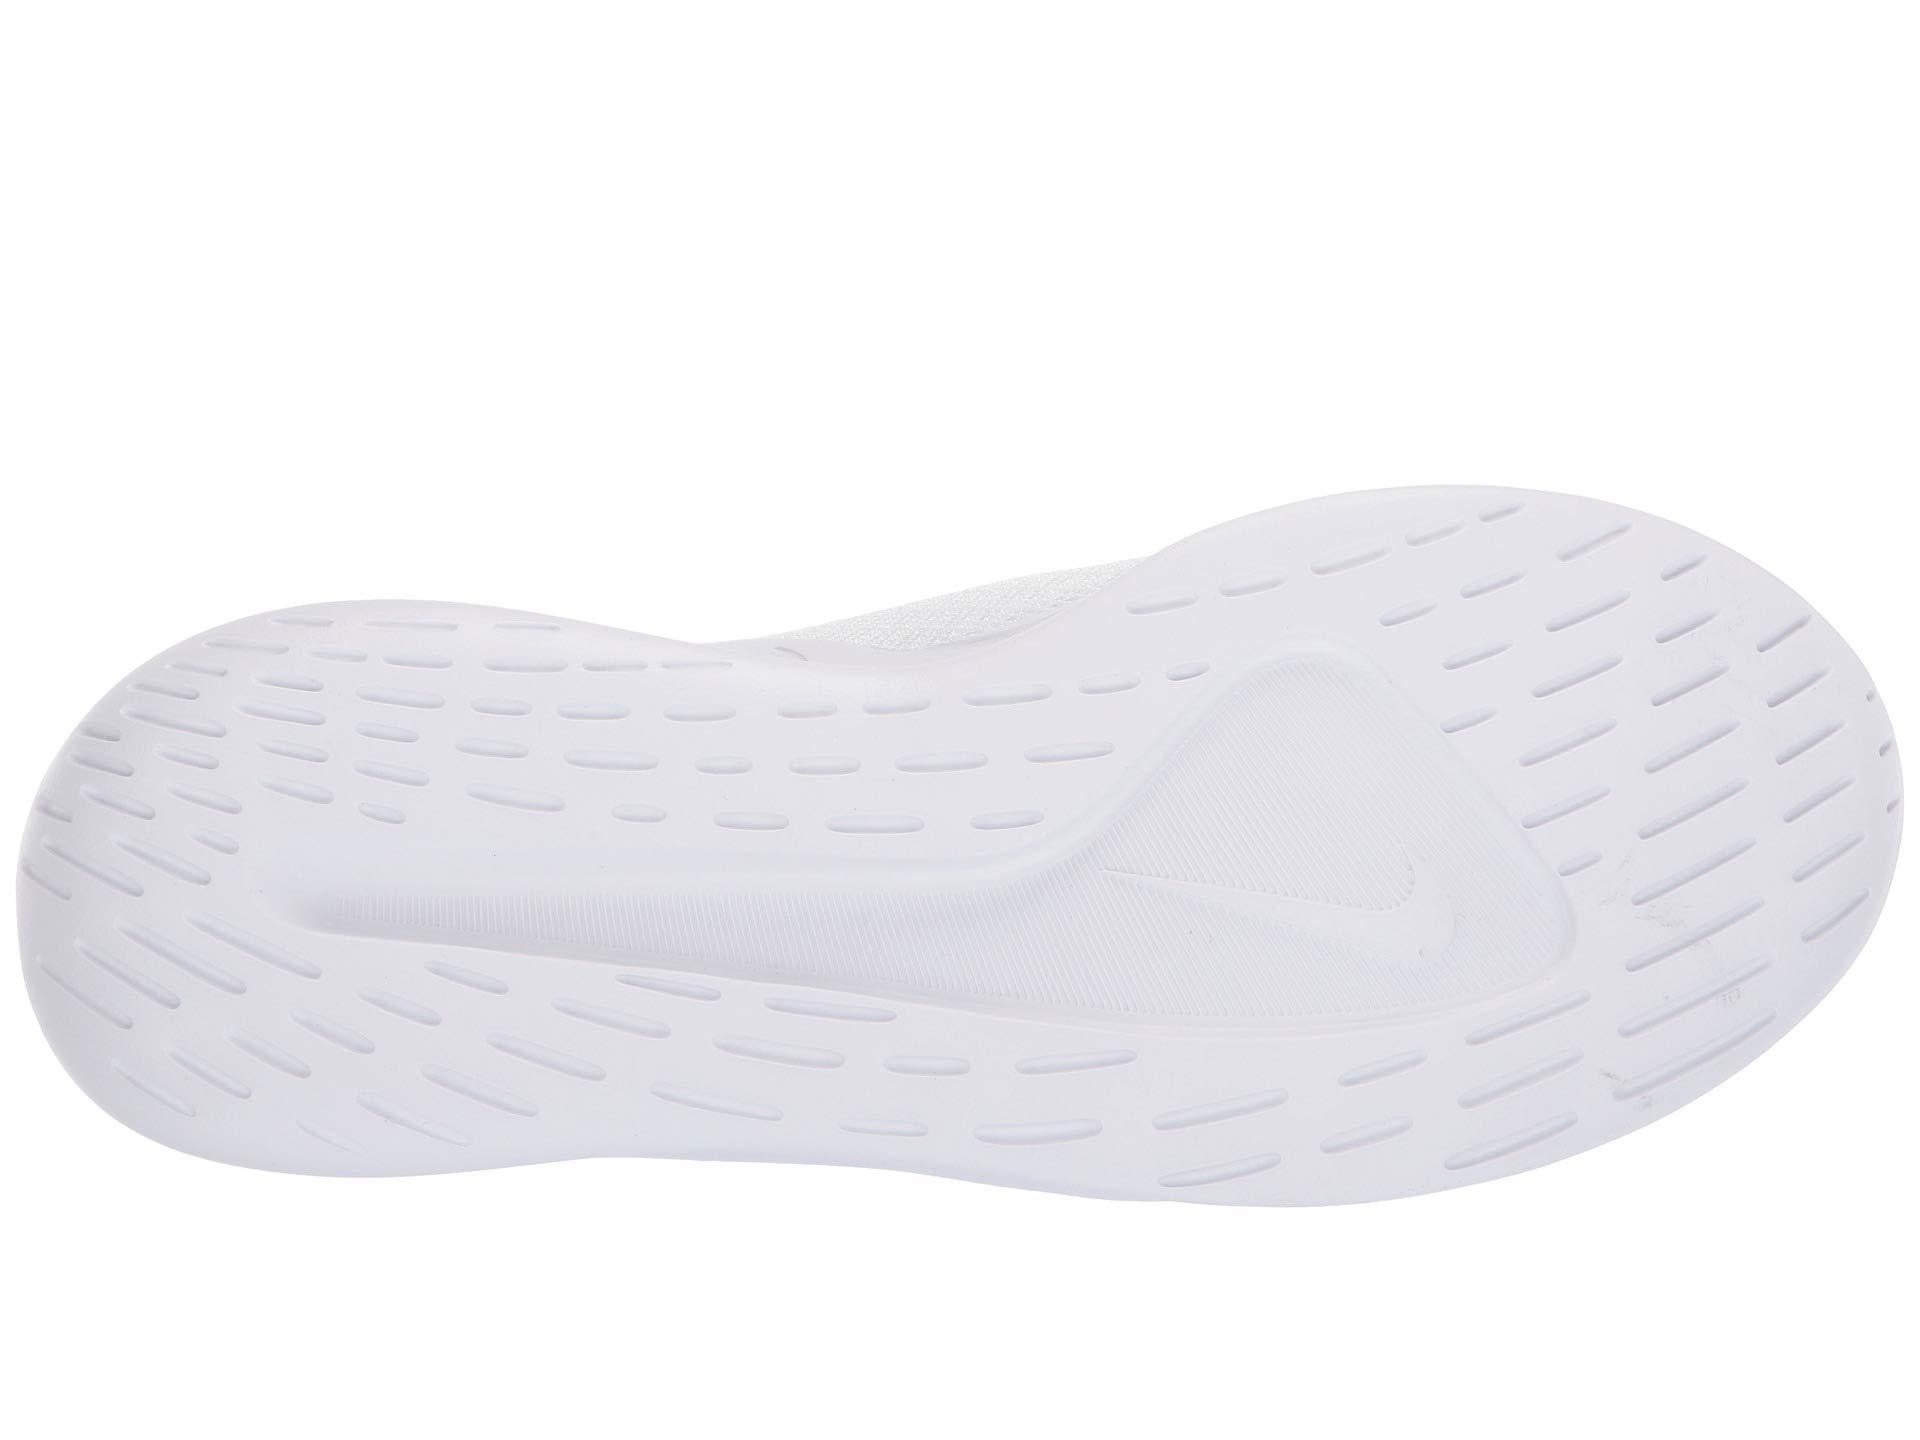 Nike Viale Slip-on (white/white) Classic Shoes - Lyst